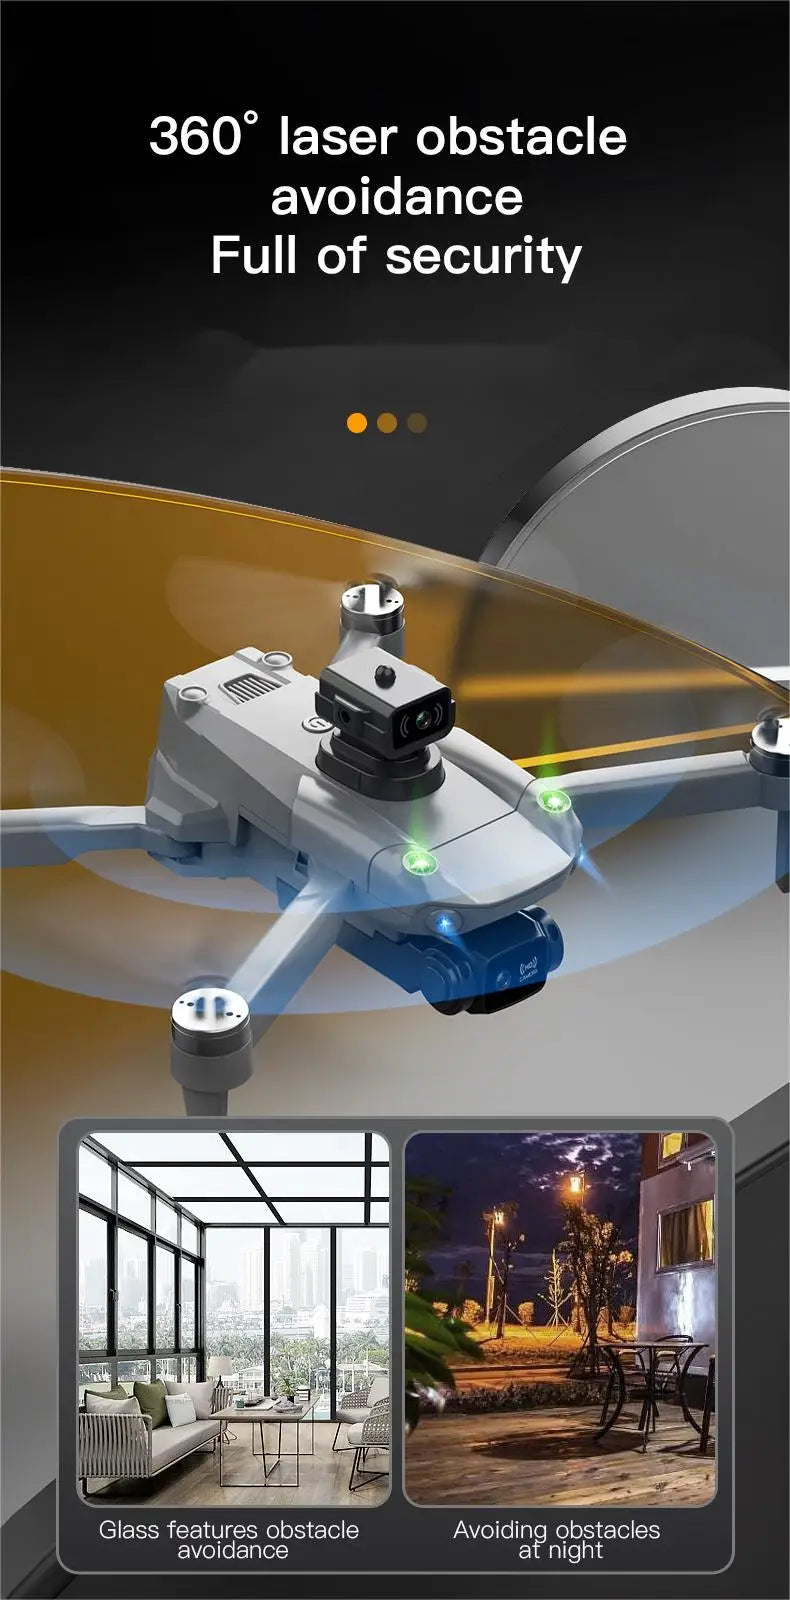 S11 Pro Drone, 360f laser obstacle avoidance full of security glass features obstacle avoidi